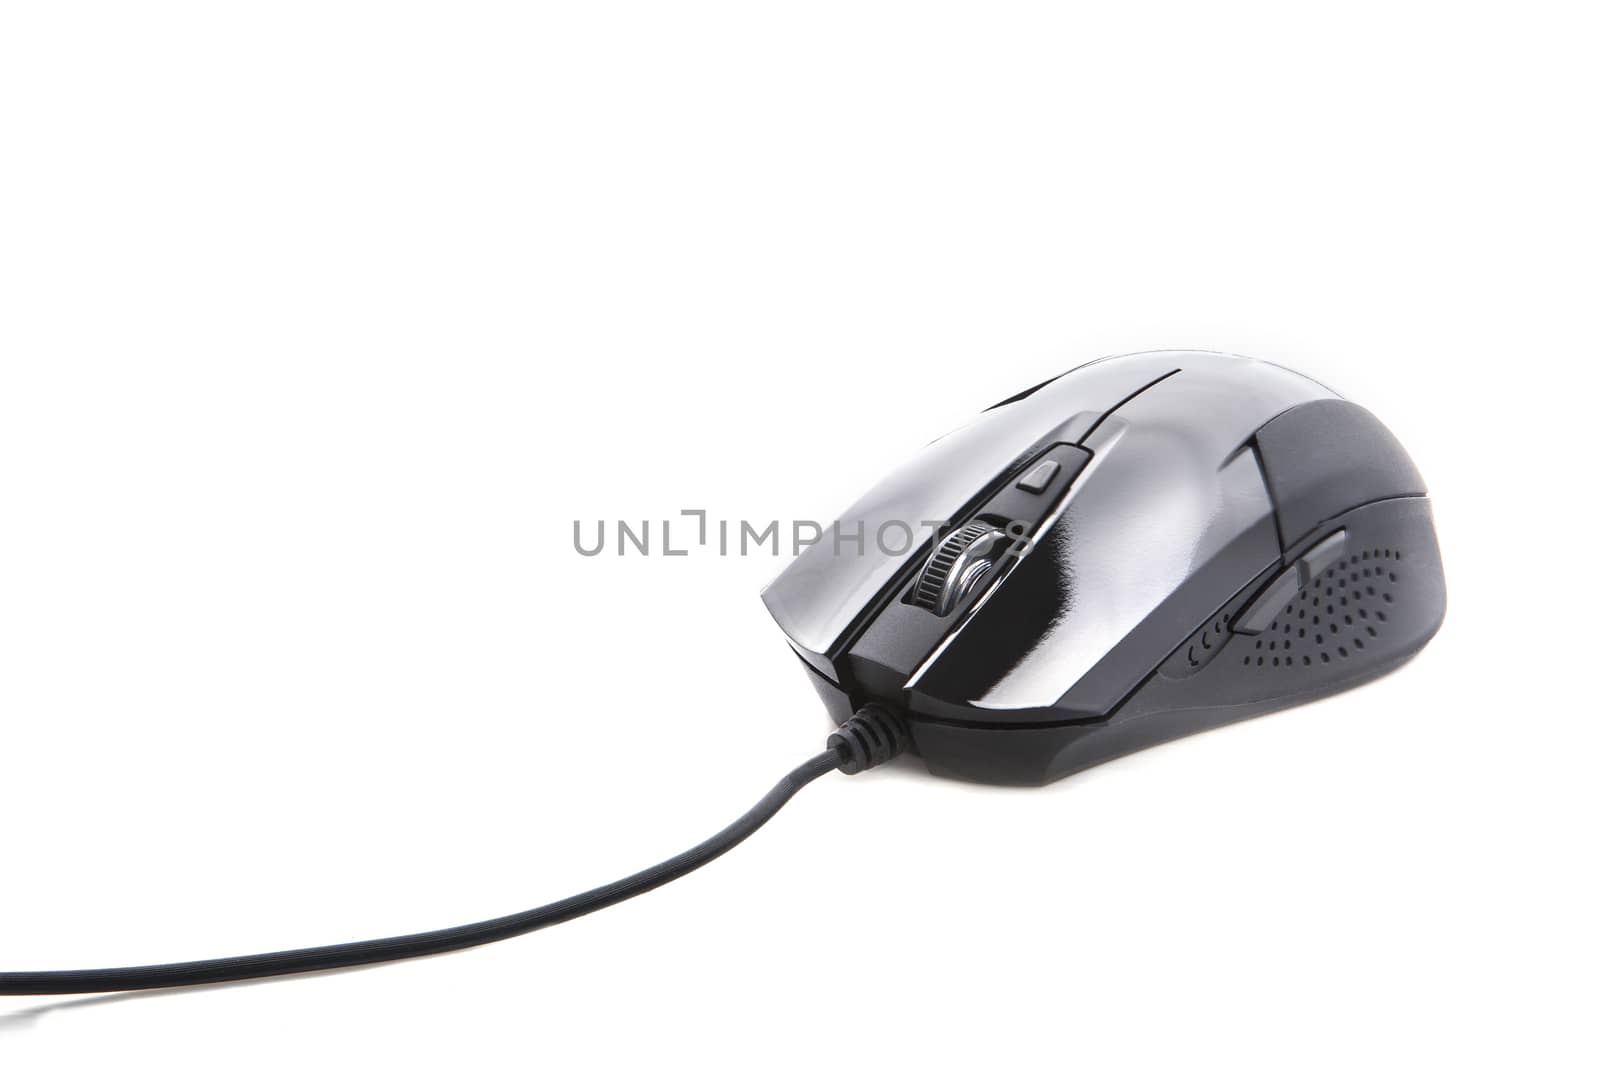 black playing game computer mouse on white backgroundd use for m by khunaspix